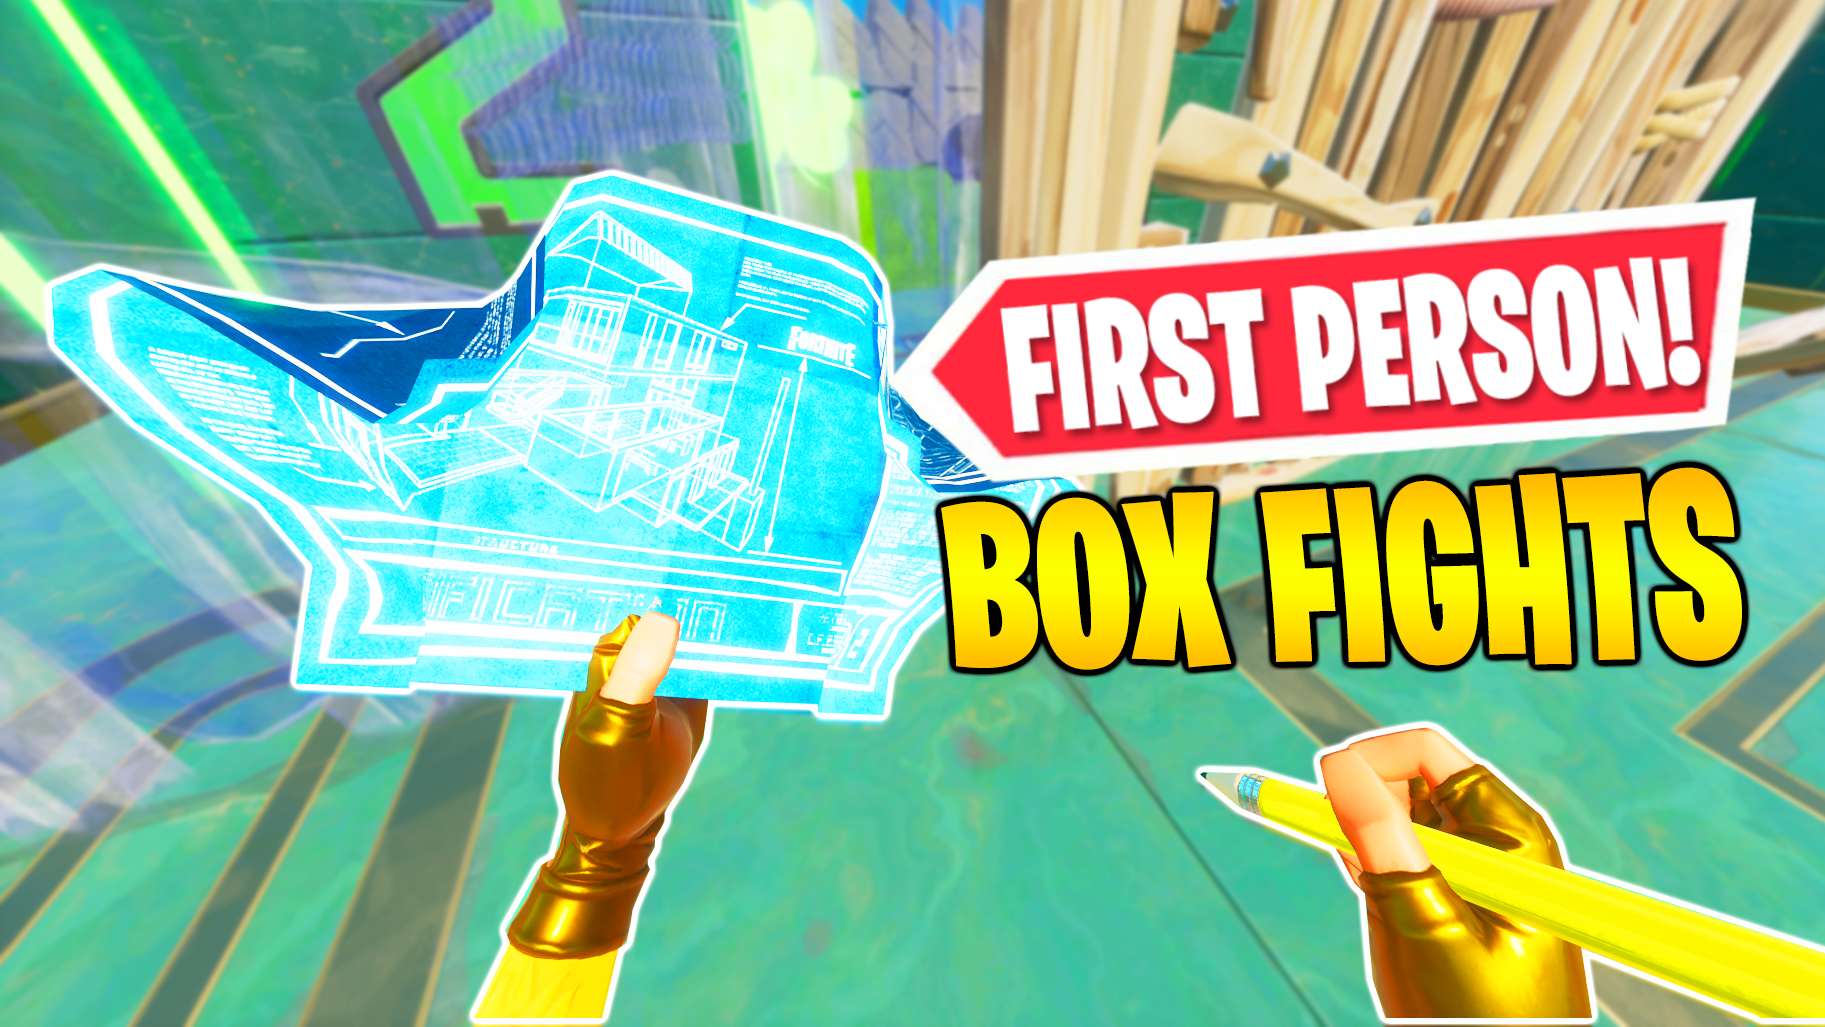 FIRST PERSON BOX FIGHTS